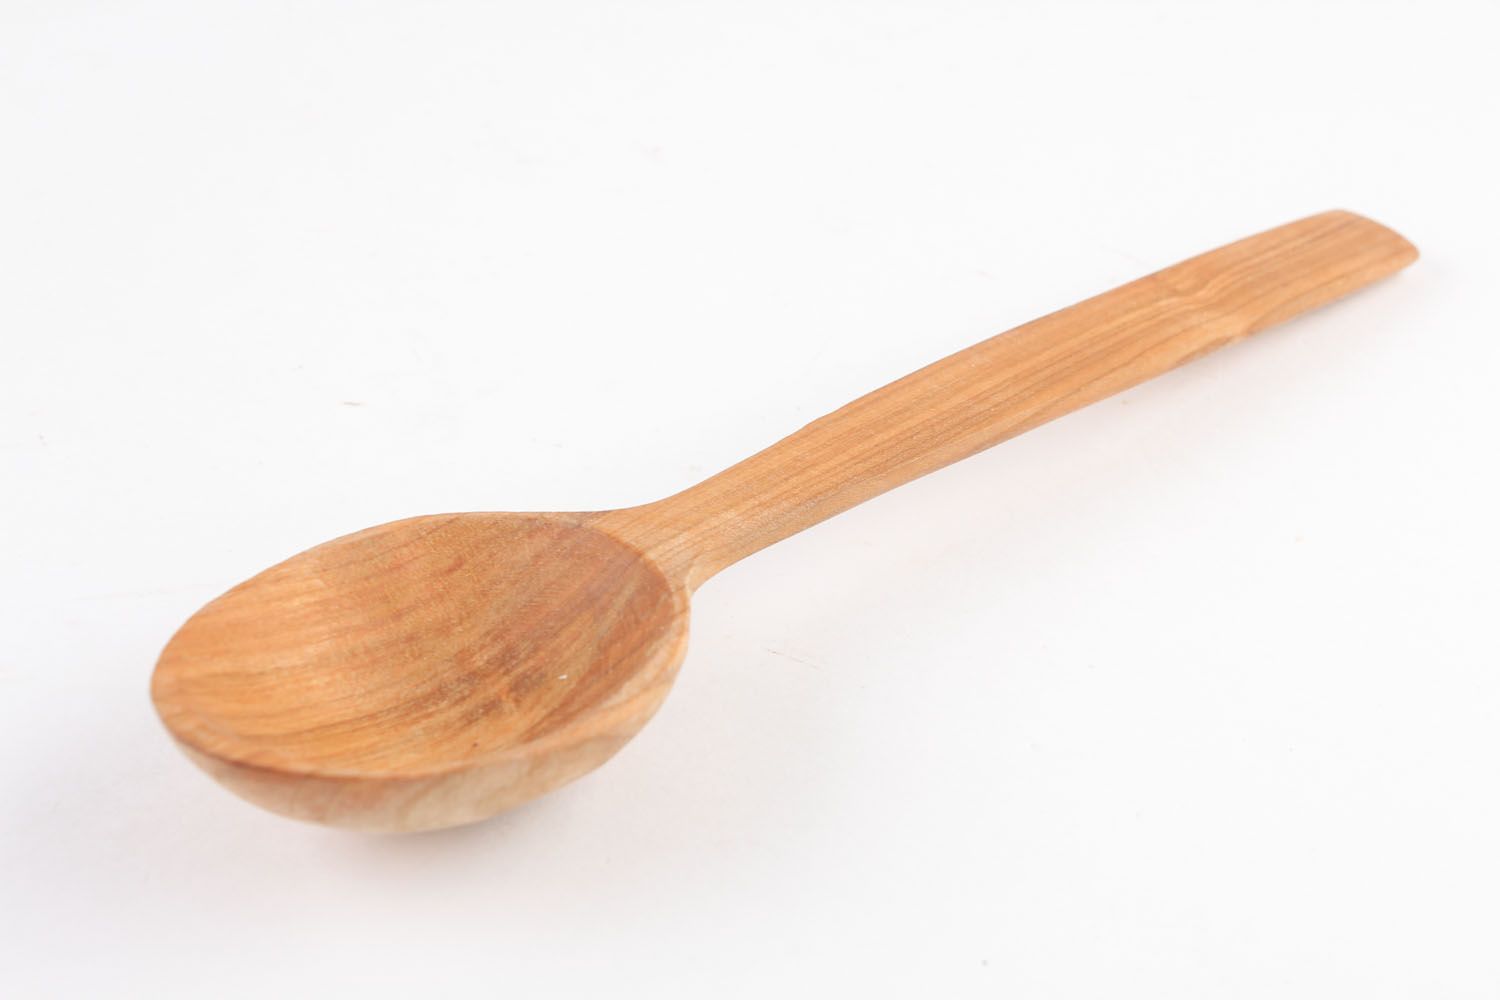 Homemade wooden spoon photo 3